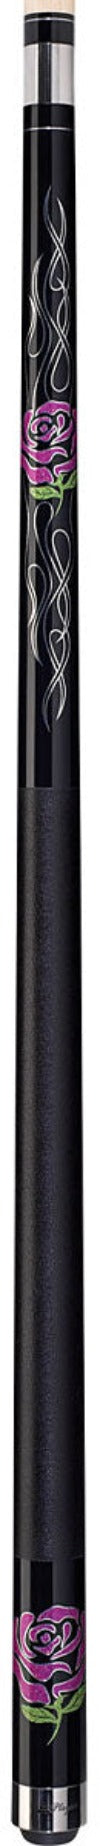 Players F-2770 - Chic Pool Cue -Players